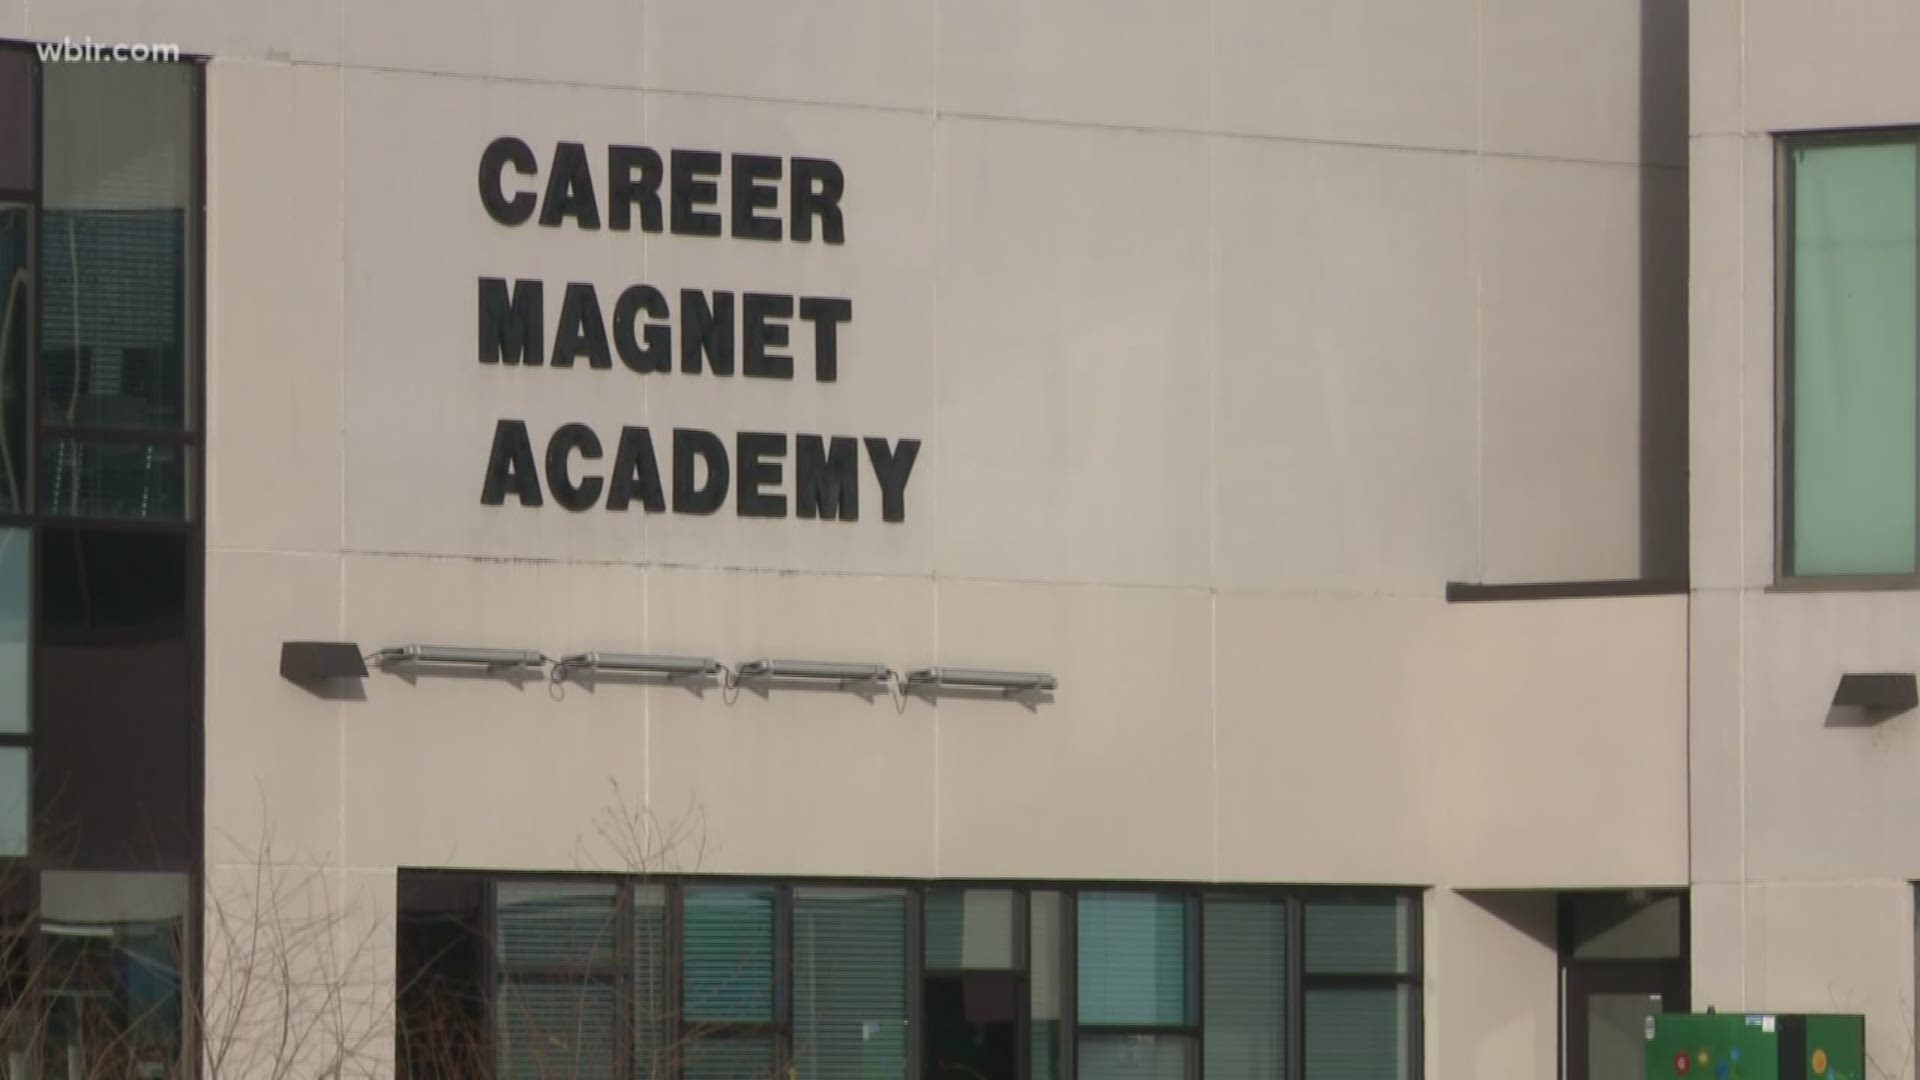 The Knox County Board of Education is expected to debate costs of and benefits of Career Magnet Academy.